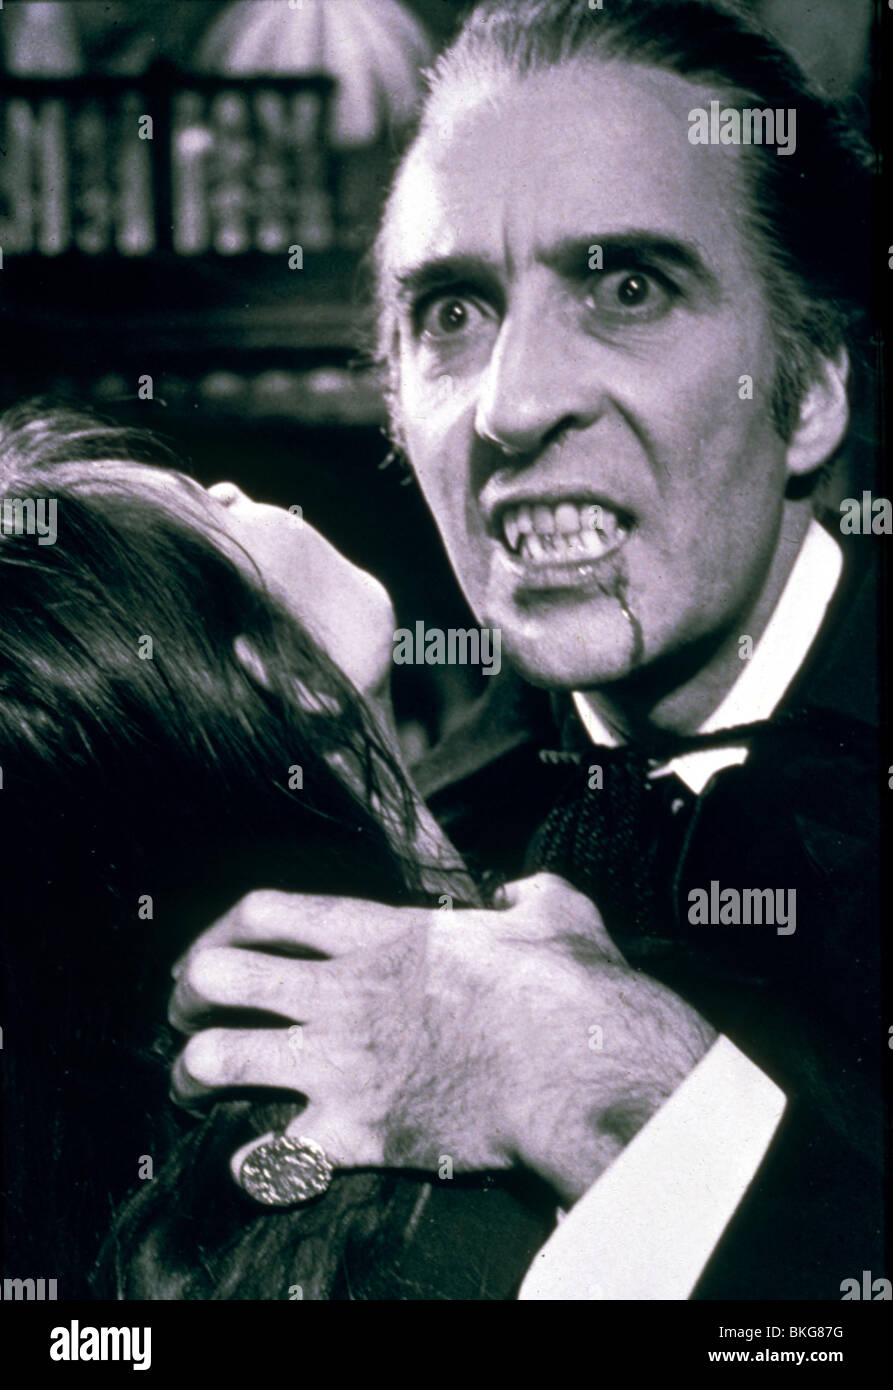 DRACULA A.D. 1972 (1972) CHRISTOPHER LEE DR72 002 Stock Photo